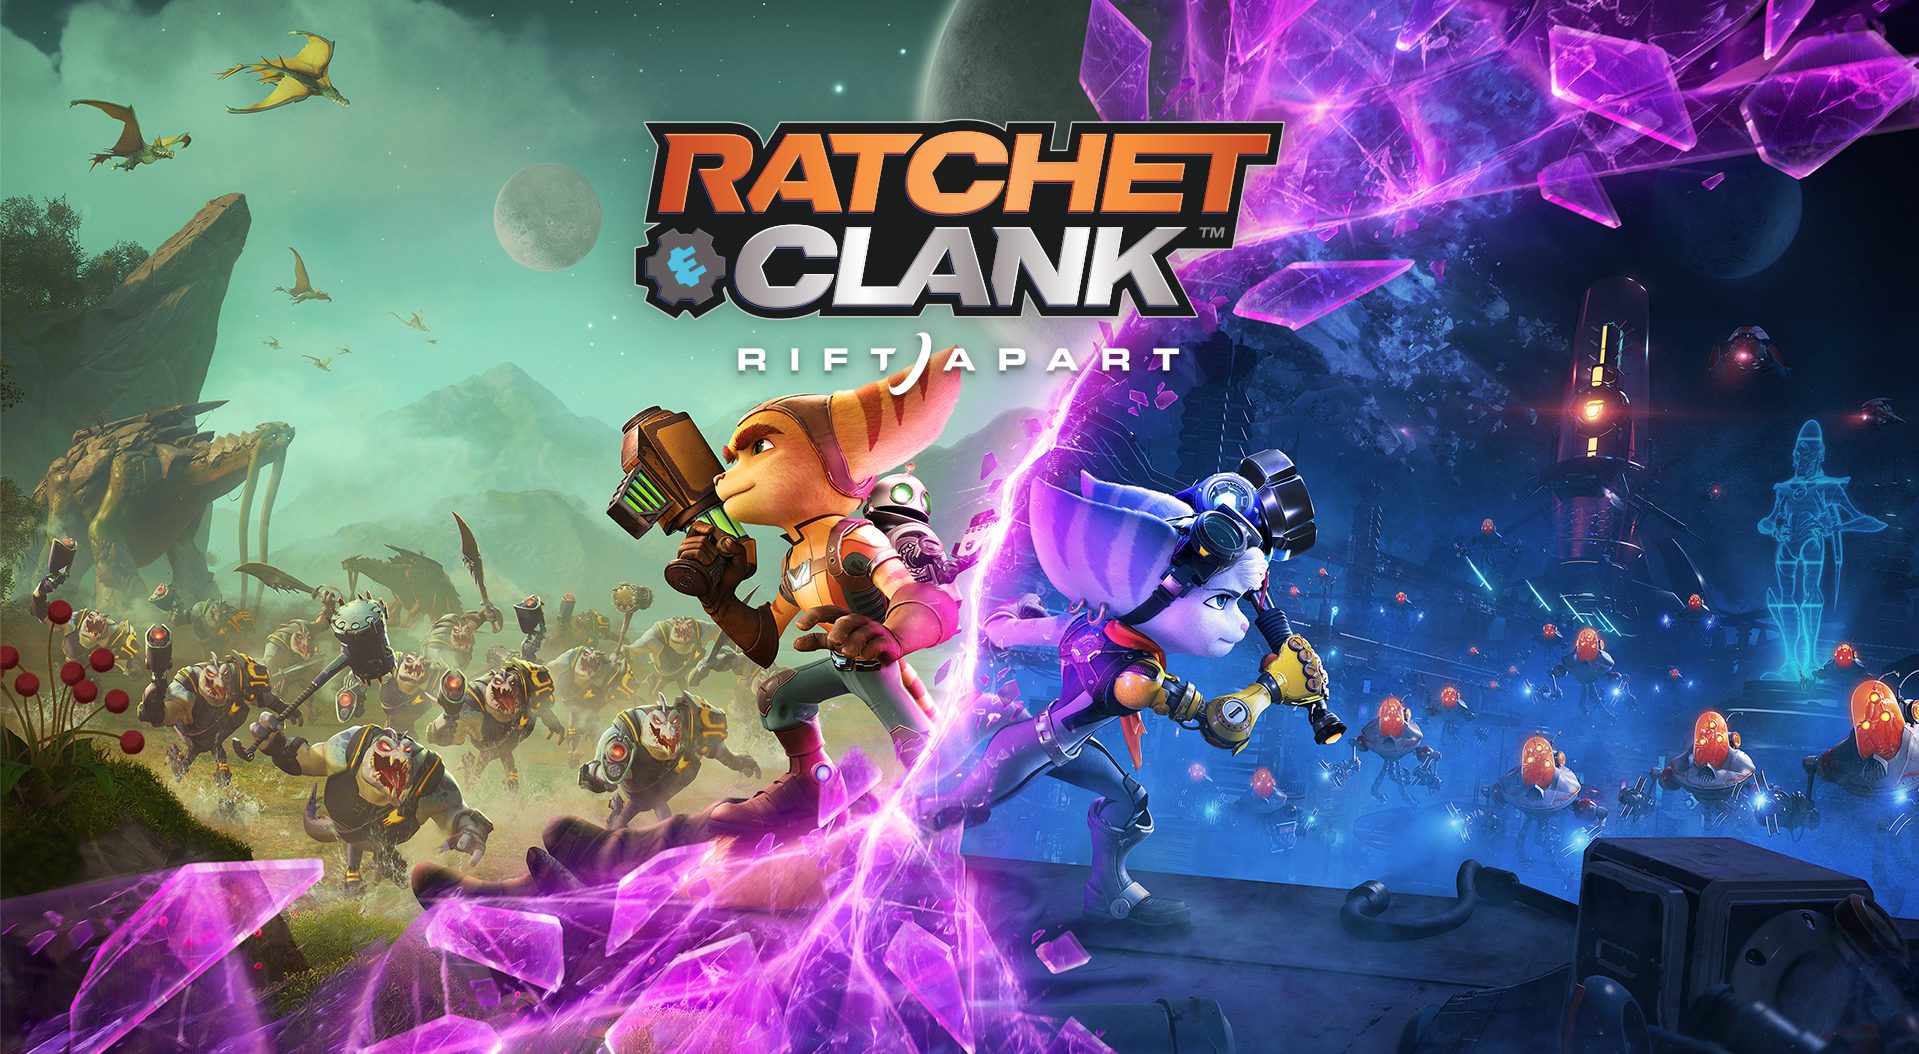 Ratchet and Rivet are standing in their own separate dimensions separated by a purple rift in the middle. Each are posing heroically with their weapons drawn and ready to fight the hordes of enemies surrounding them.